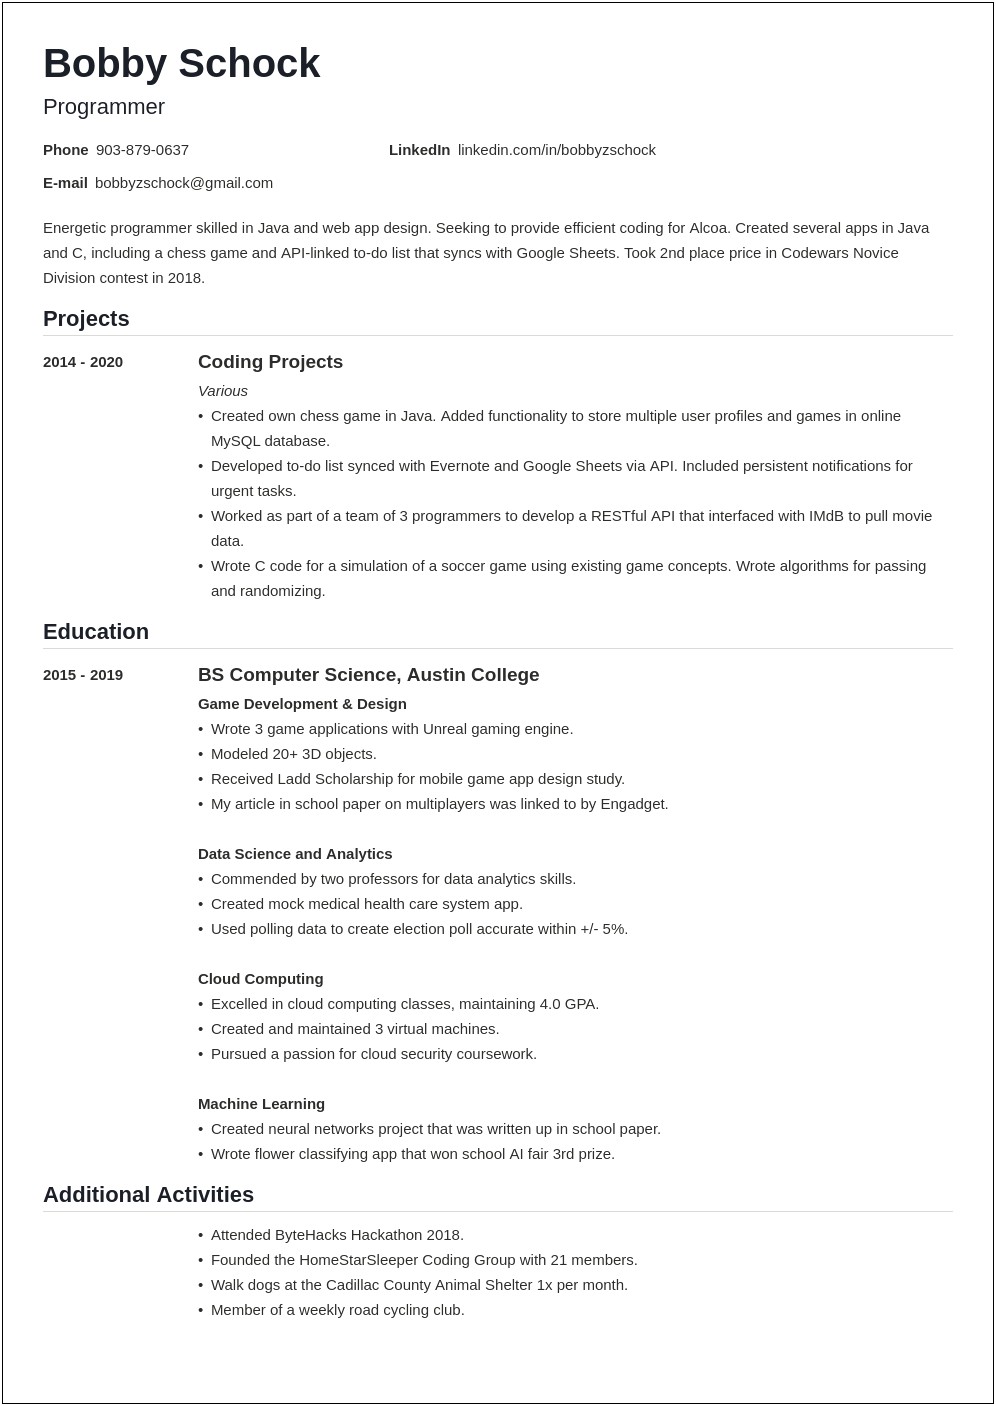 Resume Sample For Jobs With No Experience